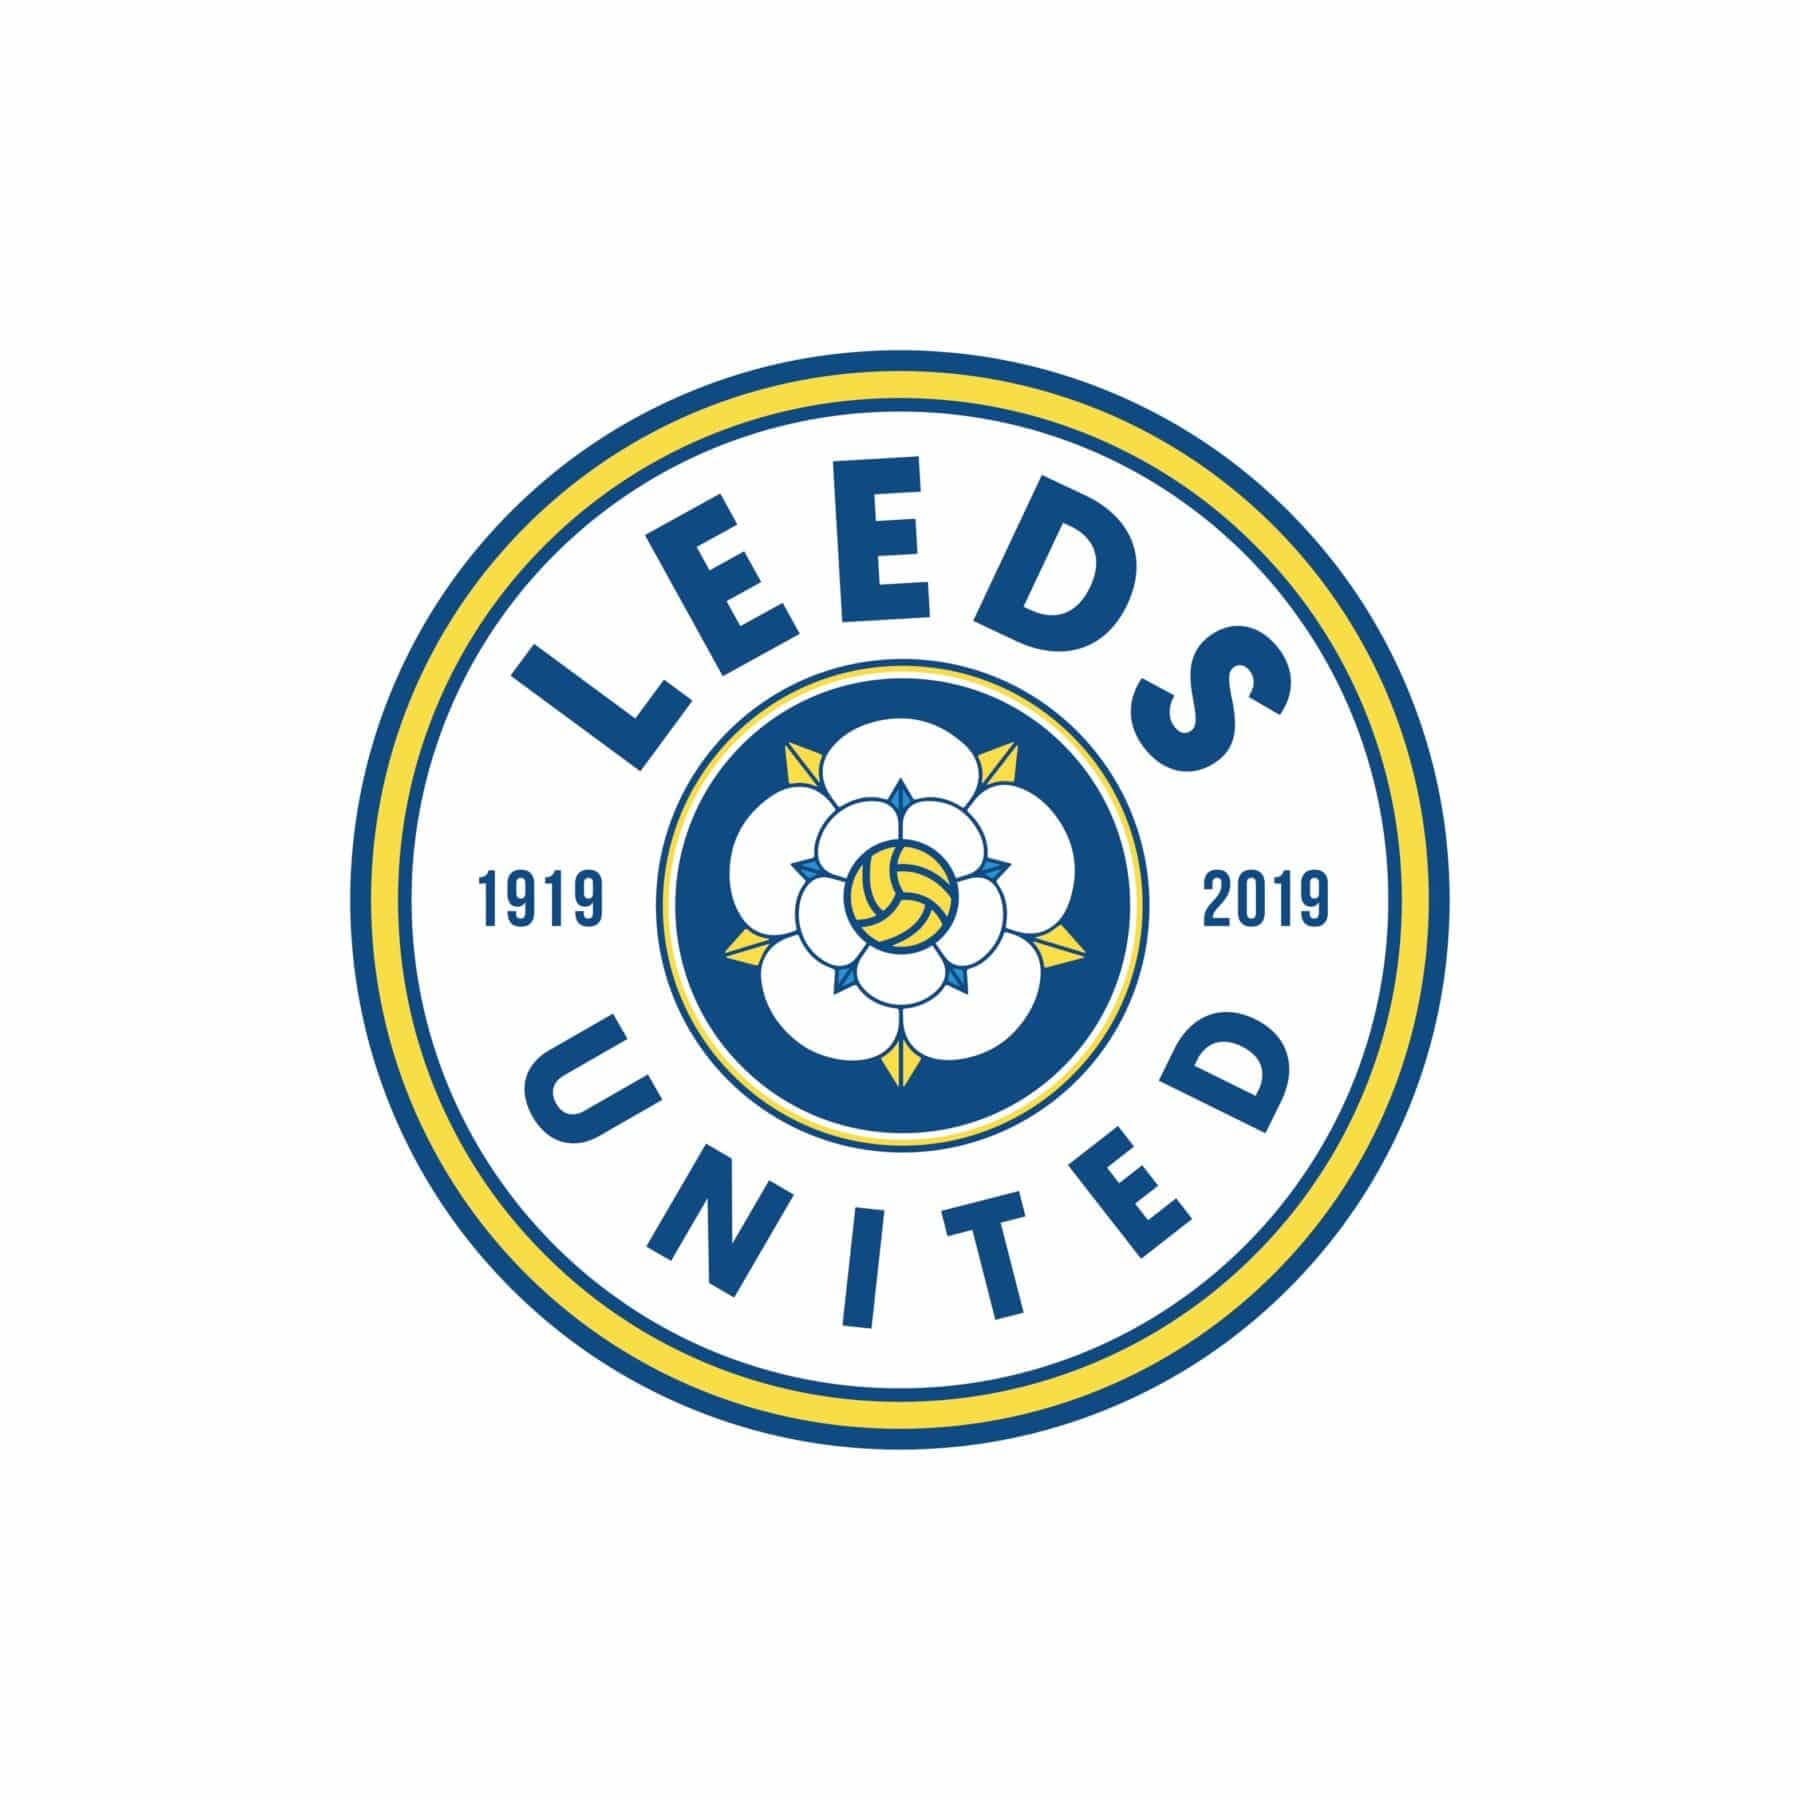 How To Completely Fail At Redesigning A New Logo: A Leeds United Story